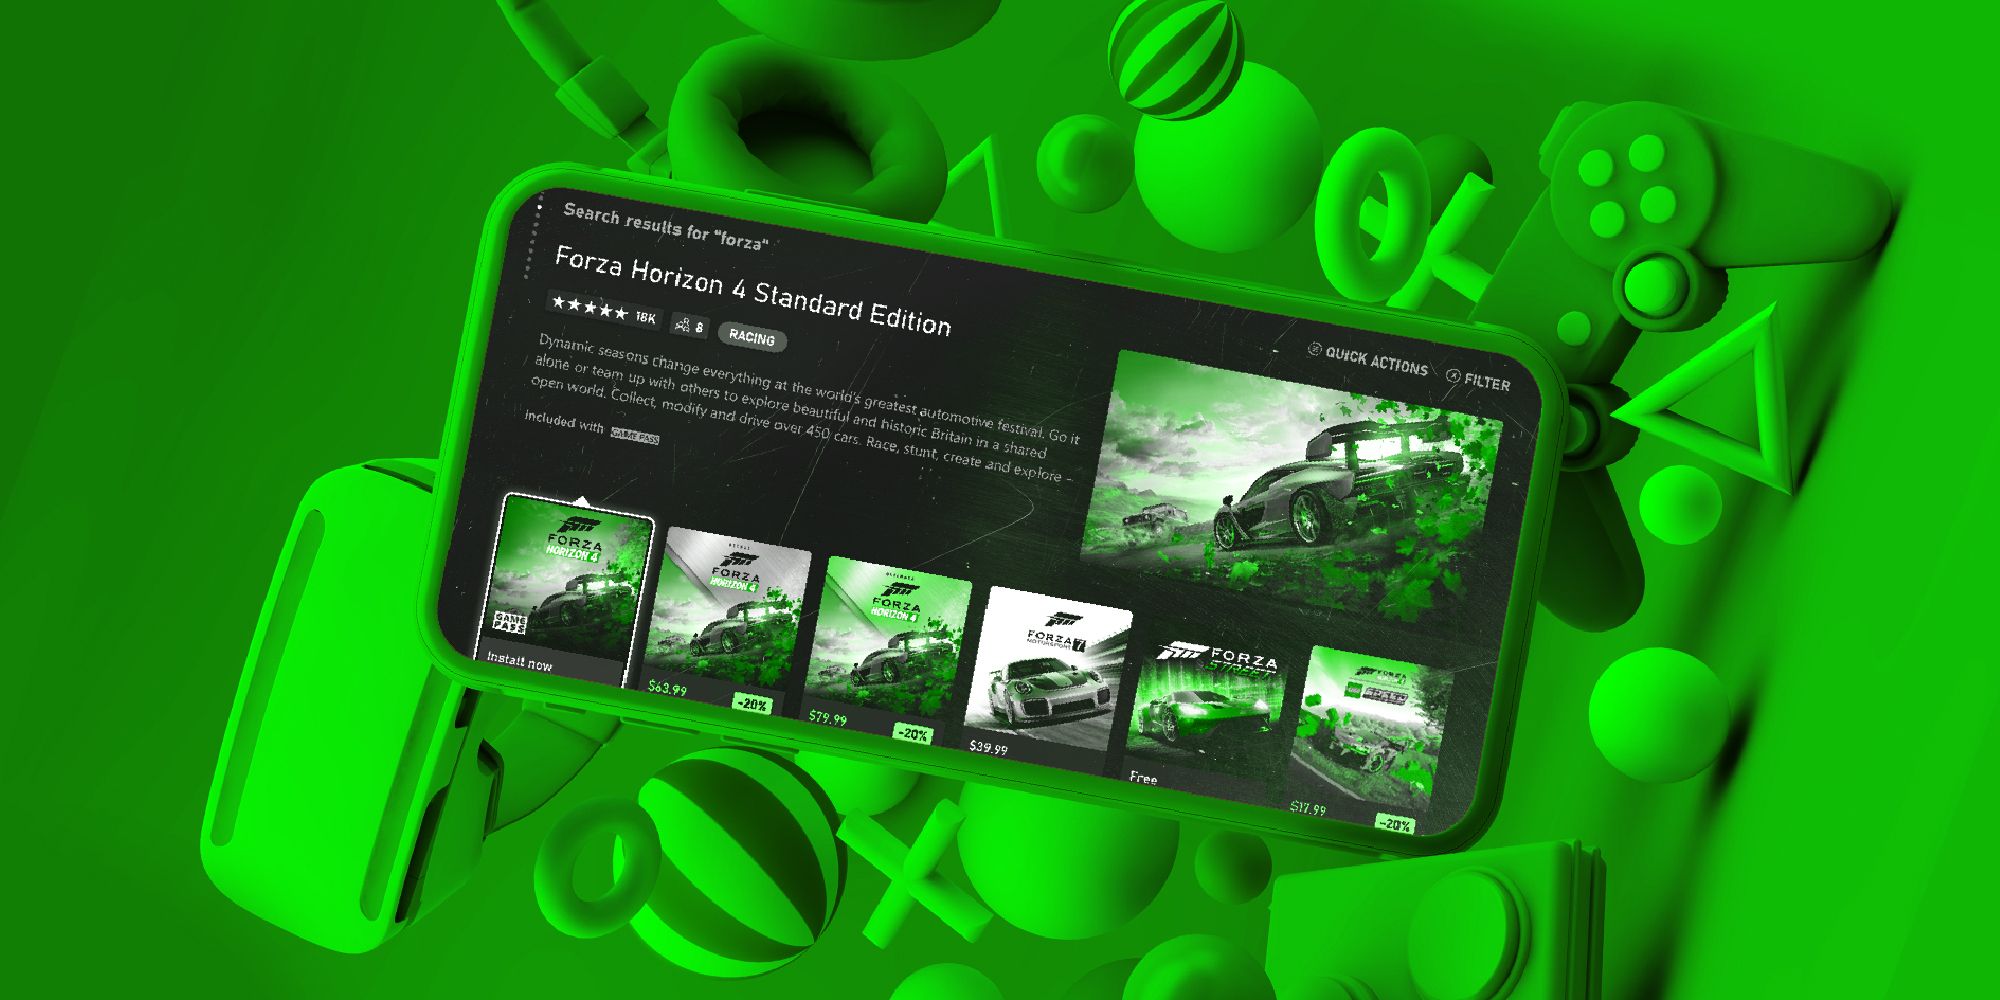 Xbox is revving up a mobile games store